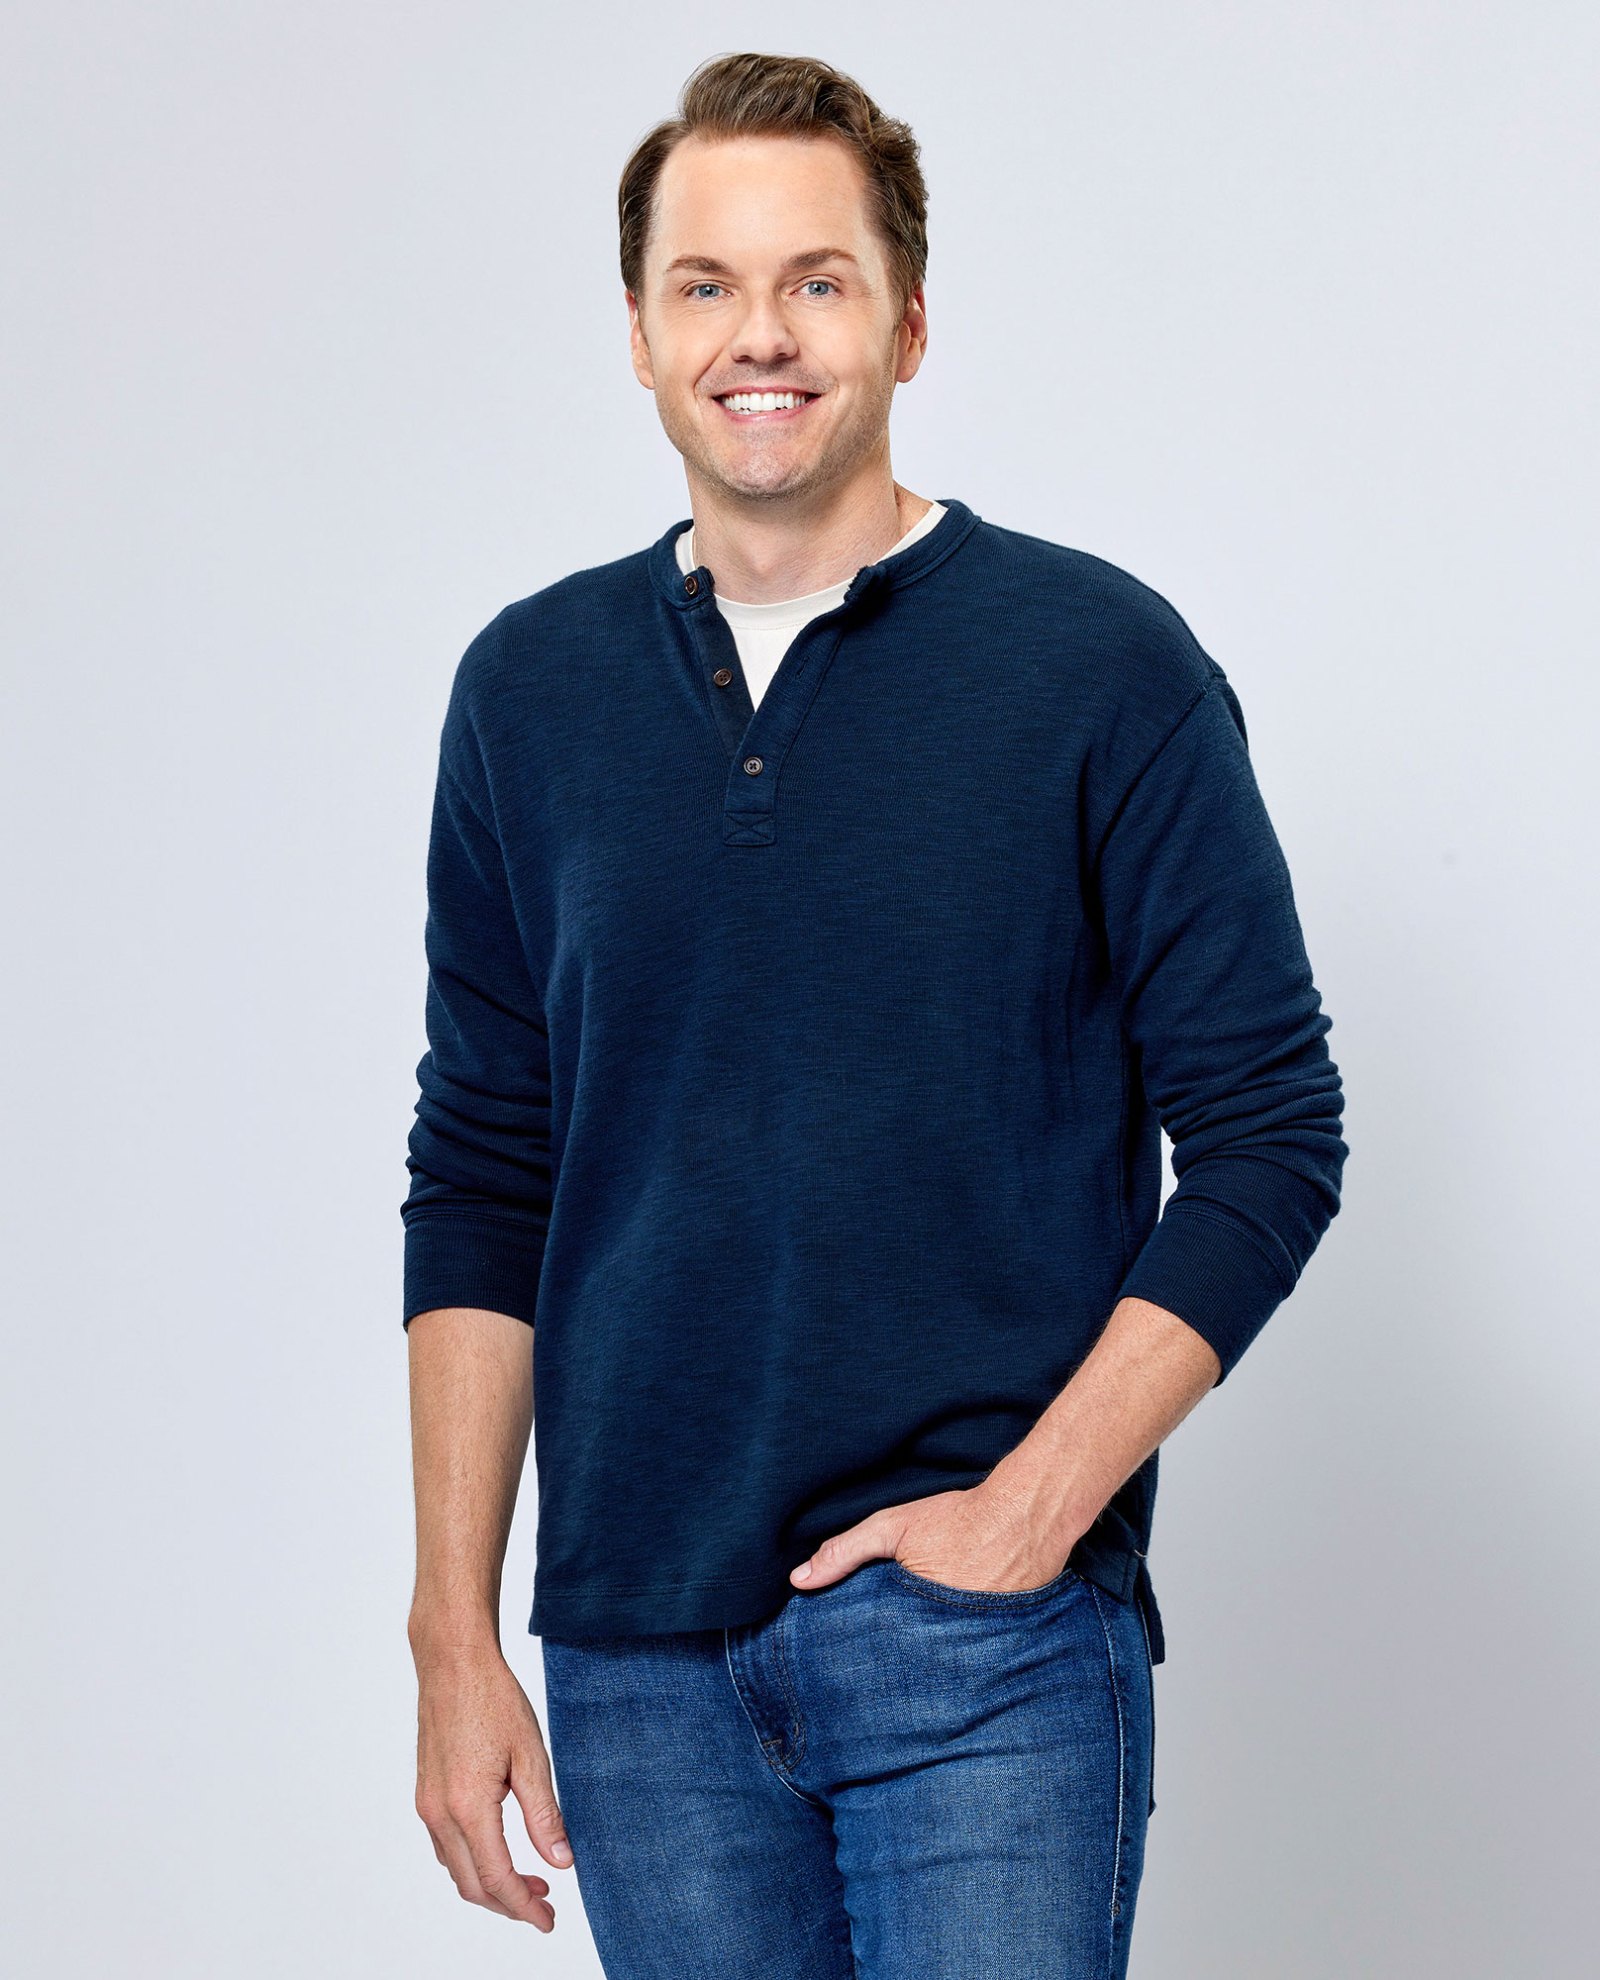 Who Is Hallmark Channel’s Paul Campbell 5 Things to Know About the Dating the Delaneys Star